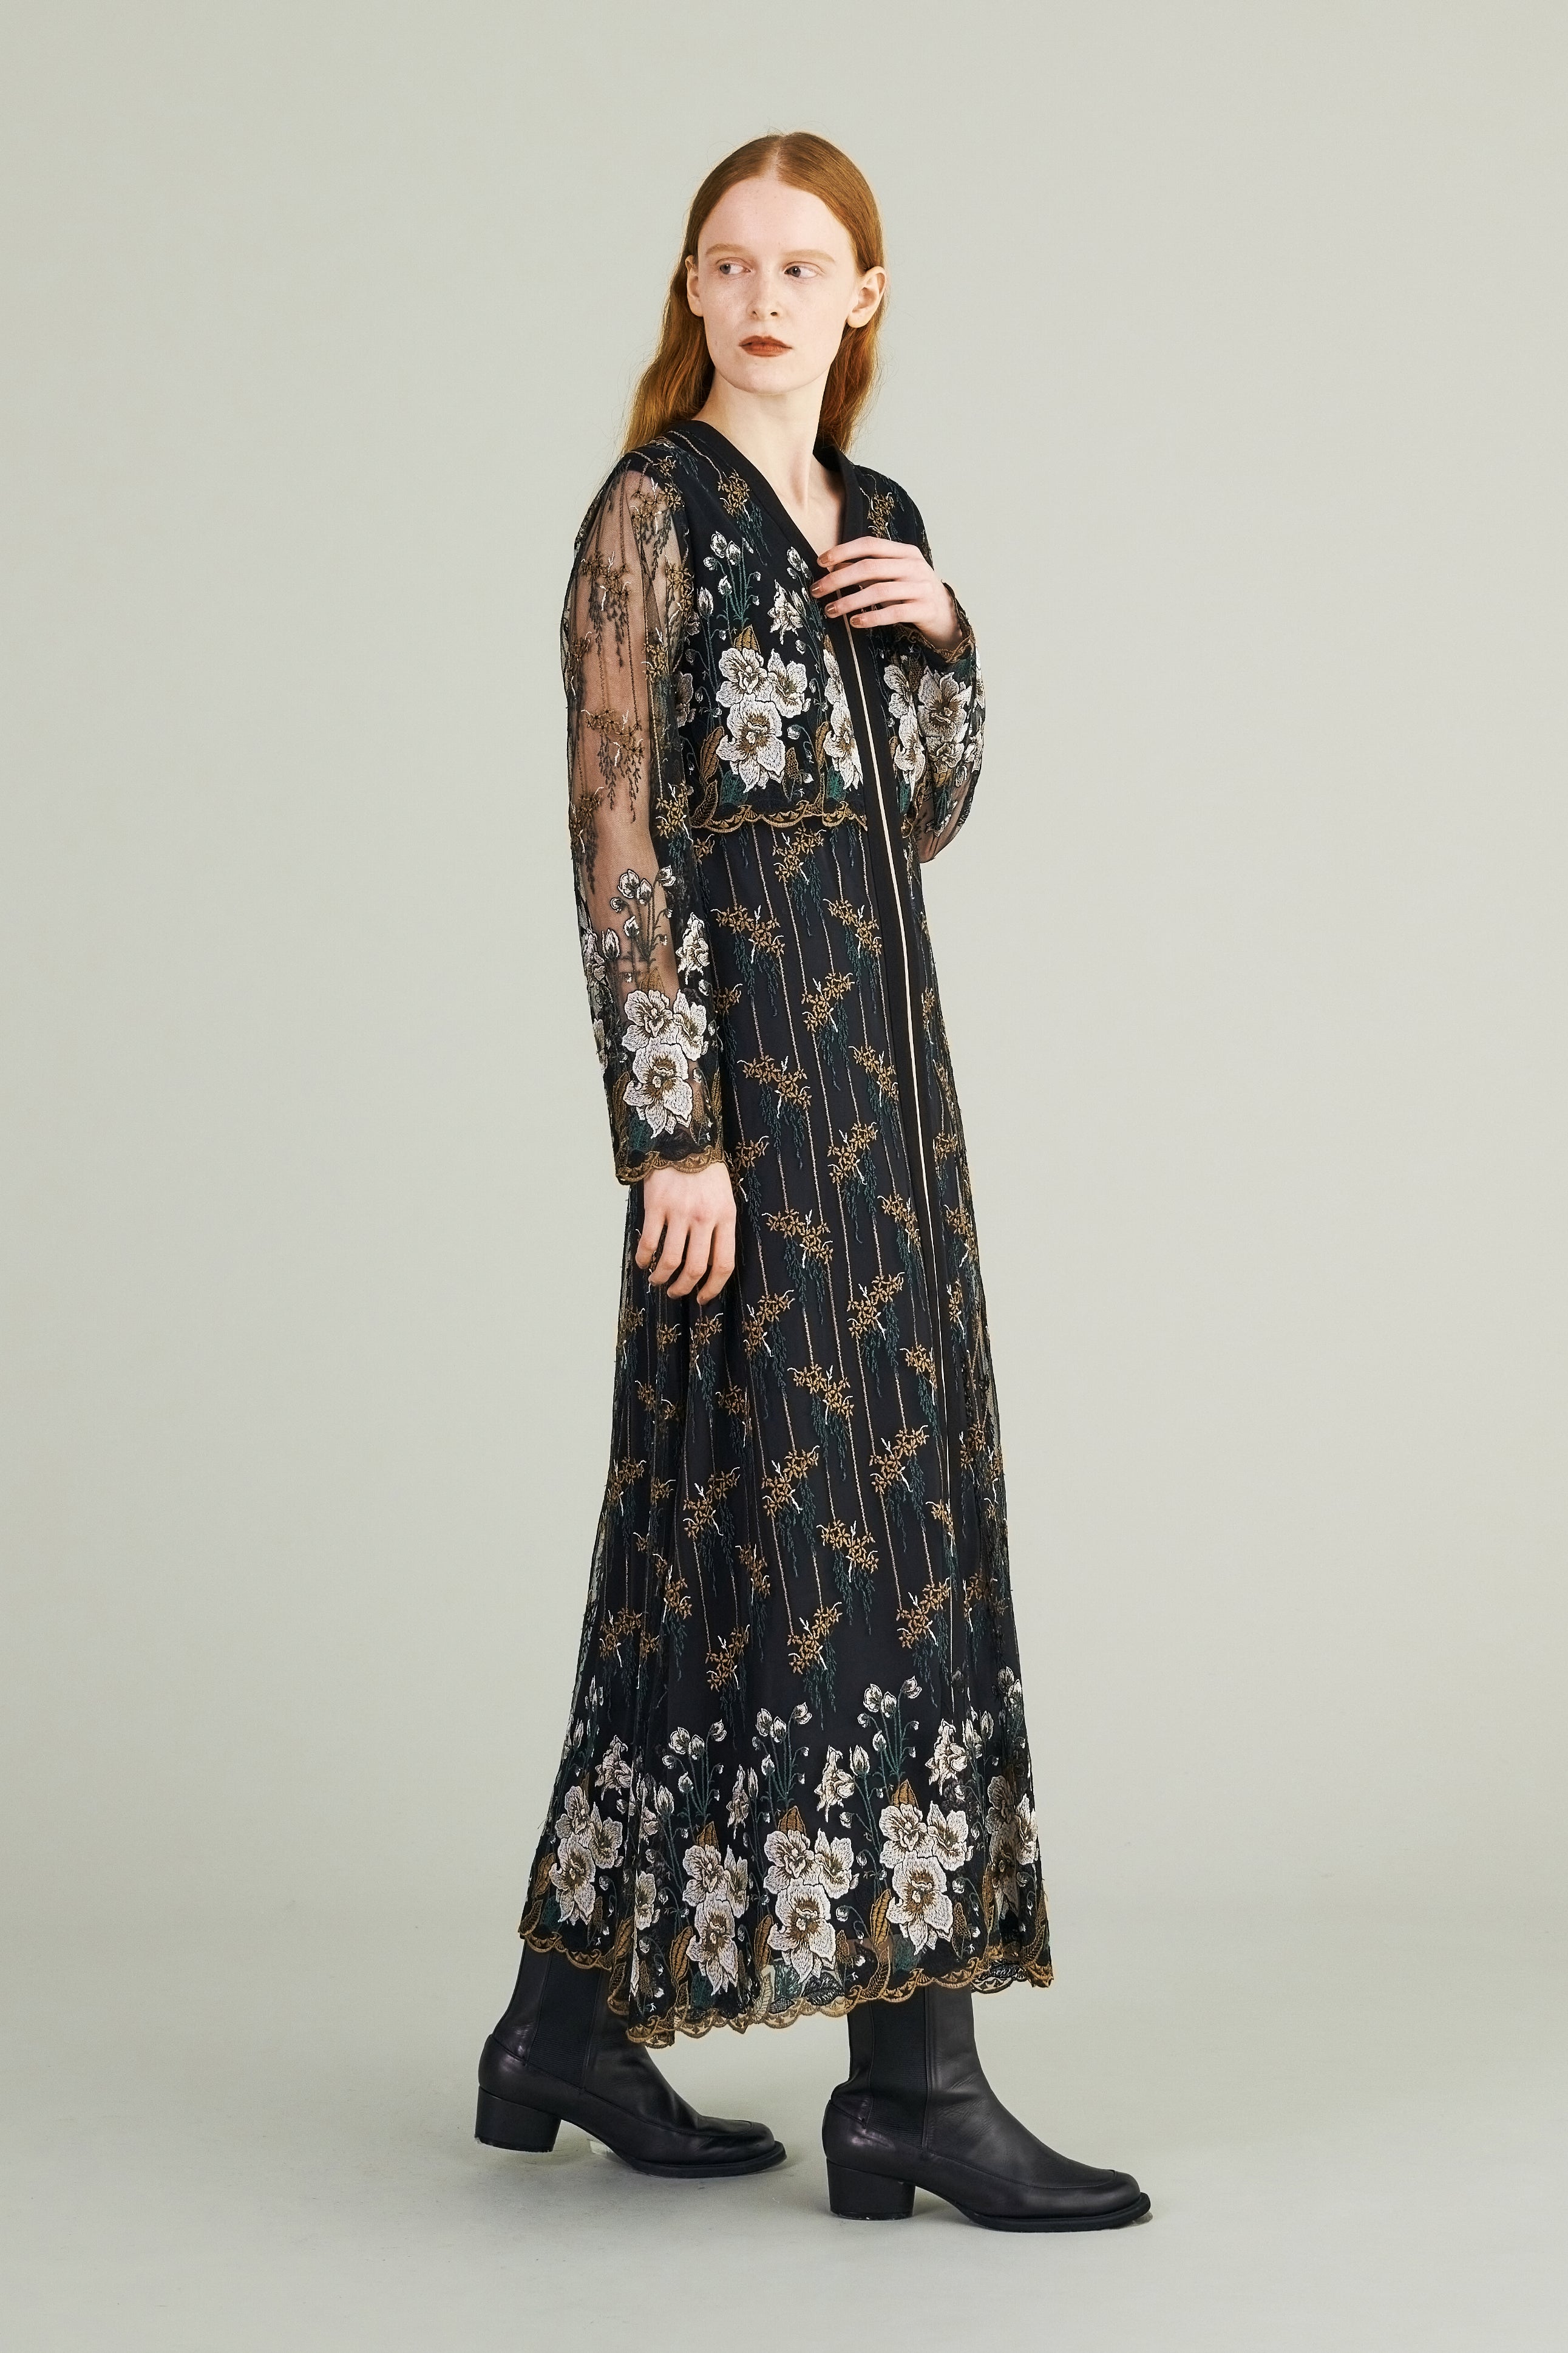 MURRAL Everlasting embroidery lace dress